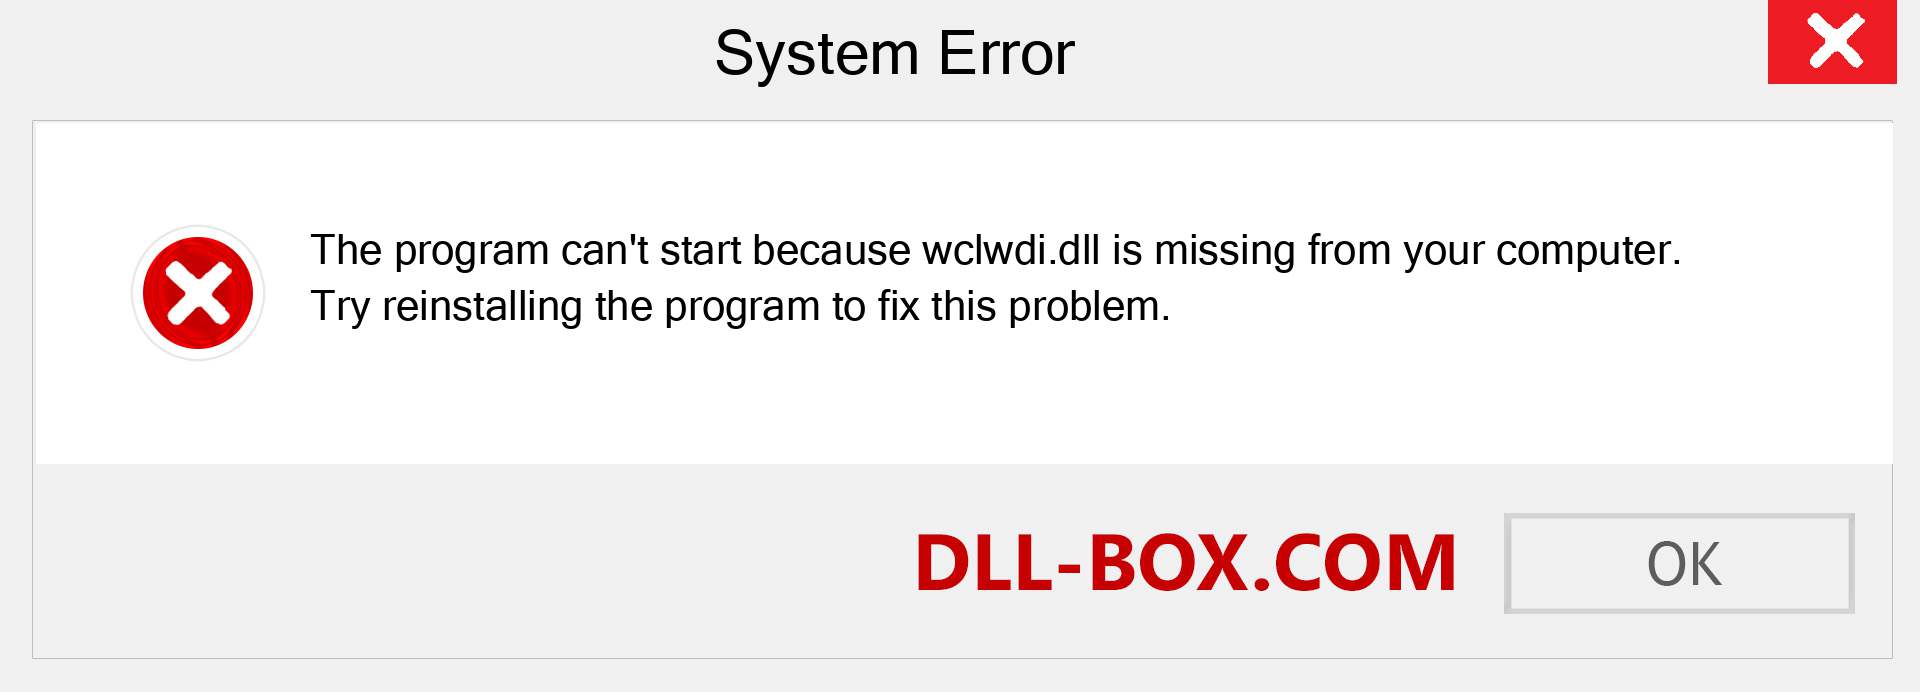  wclwdi.dll file is missing?. Download for Windows 7, 8, 10 - Fix  wclwdi dll Missing Error on Windows, photos, images